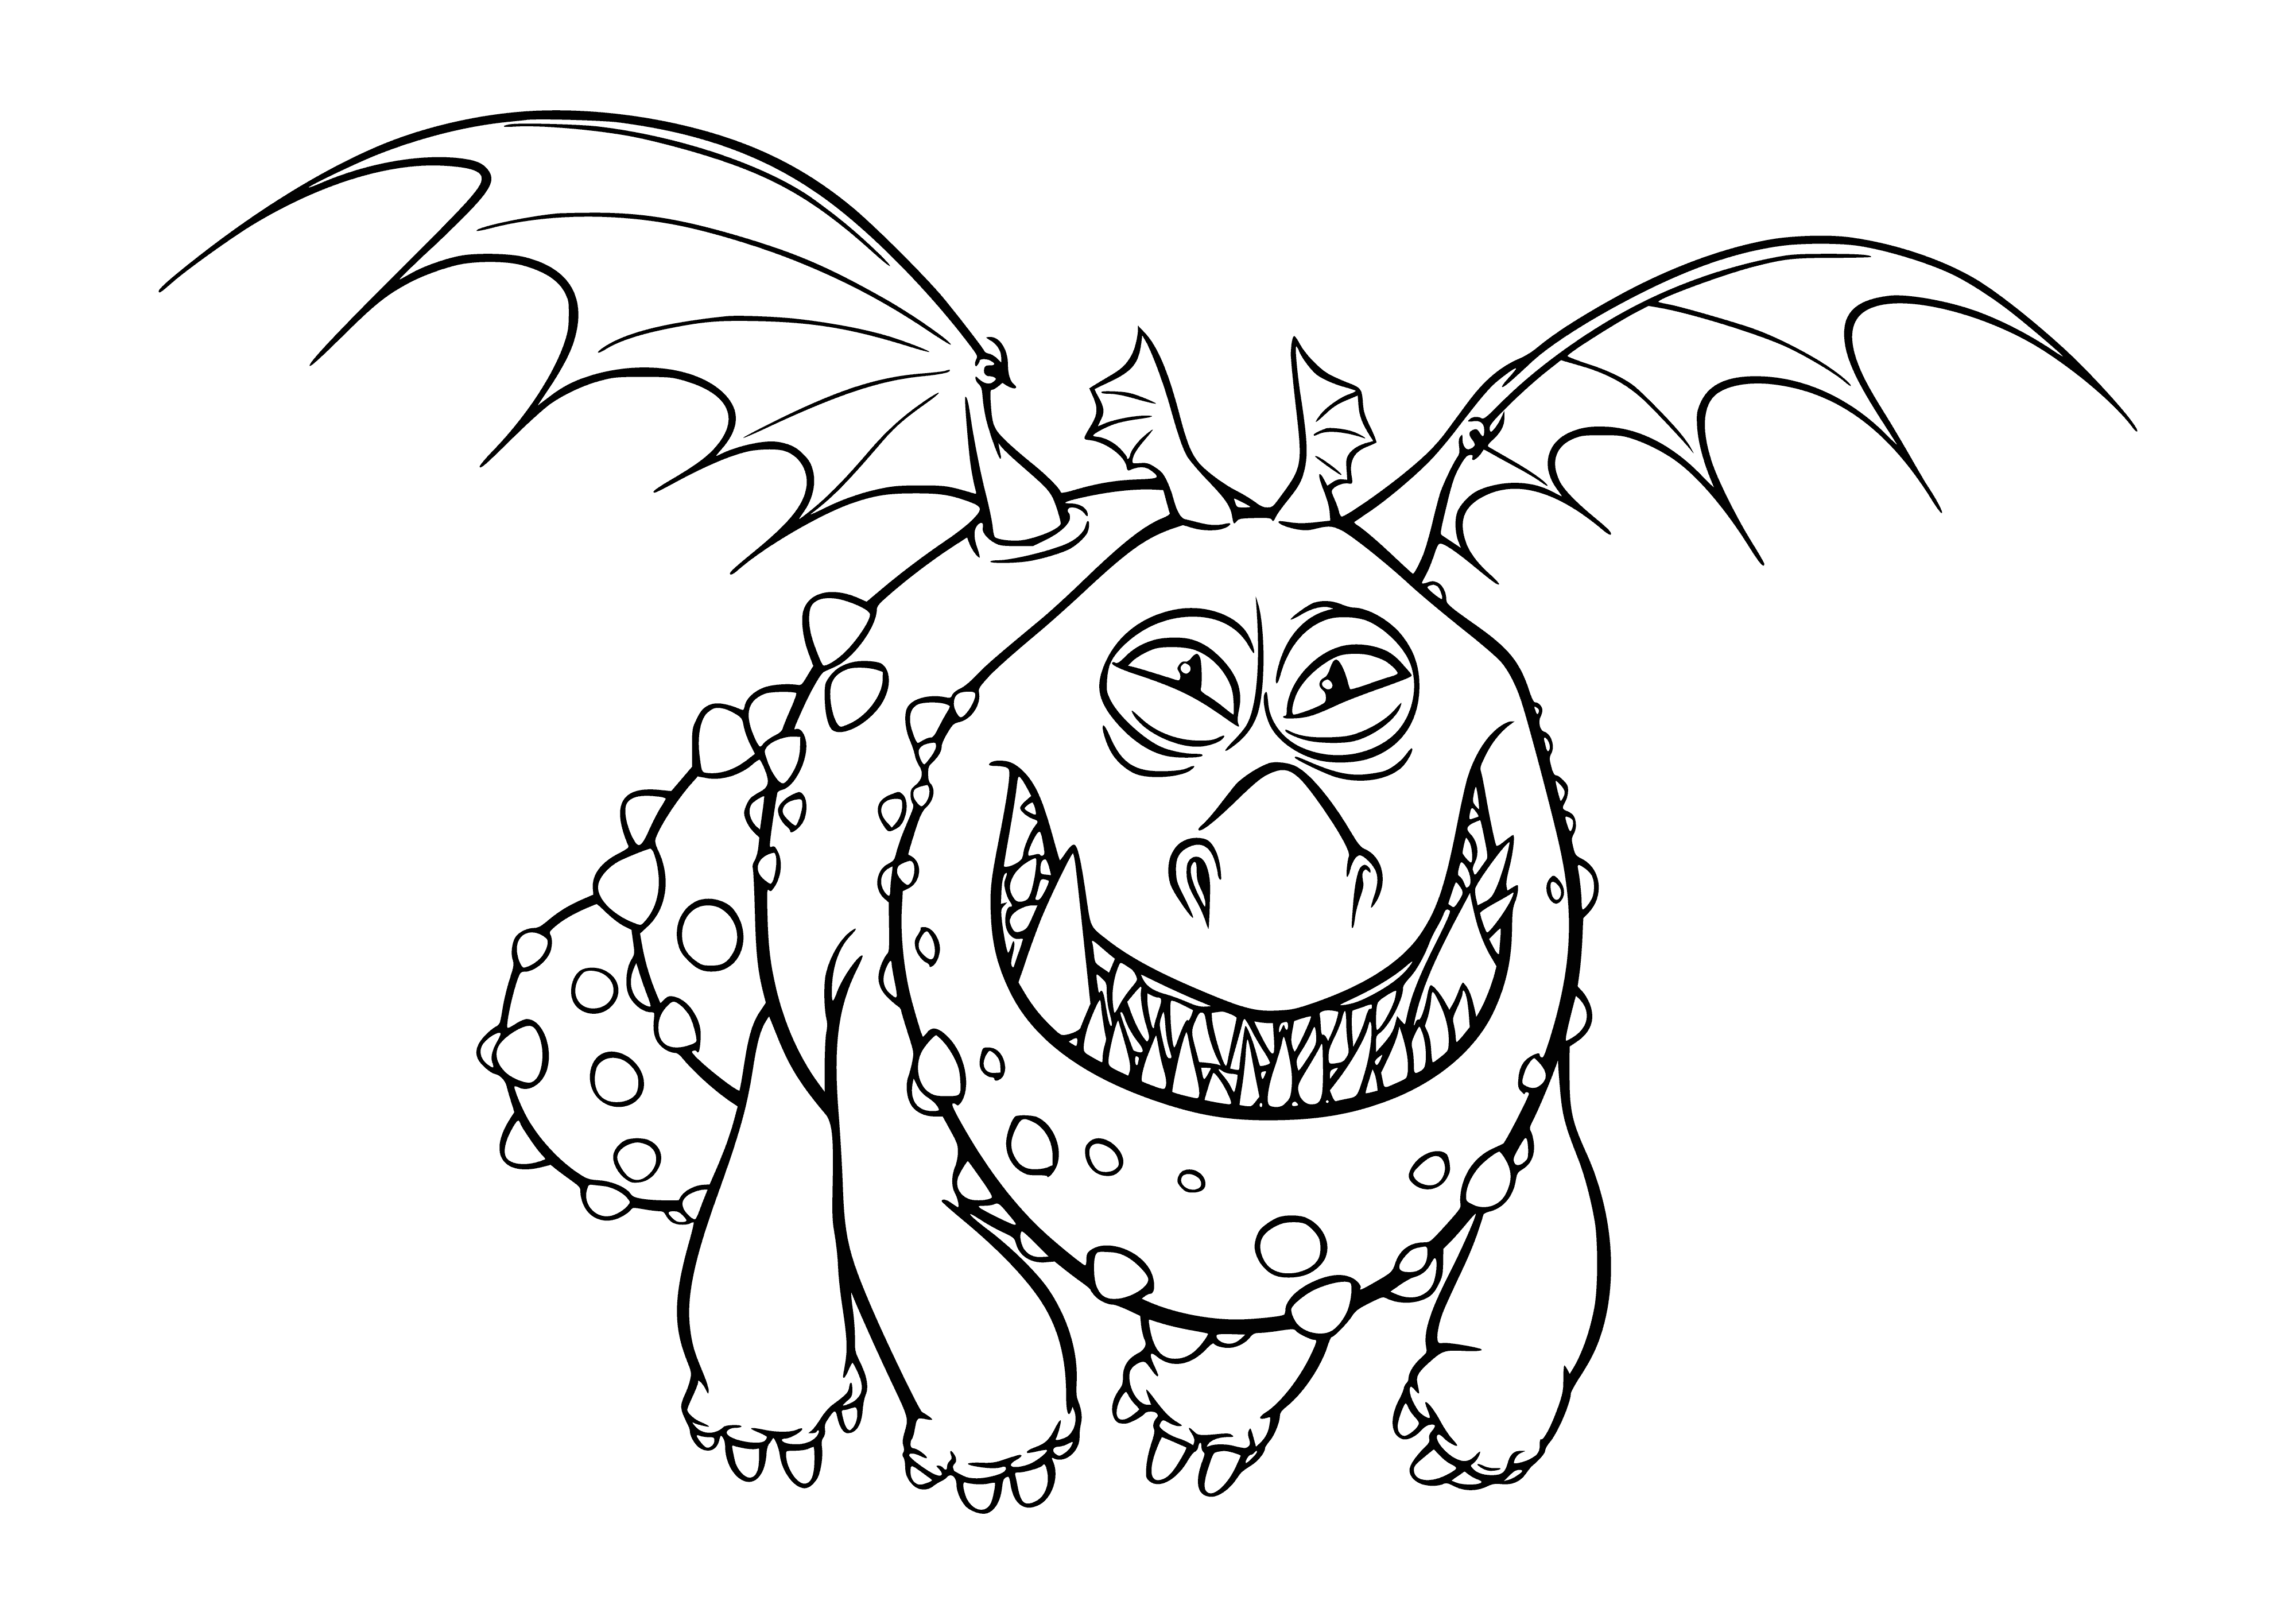 coloring page: A dragon sausage with veggies and sides, sliced open and ready to eat! #tasty